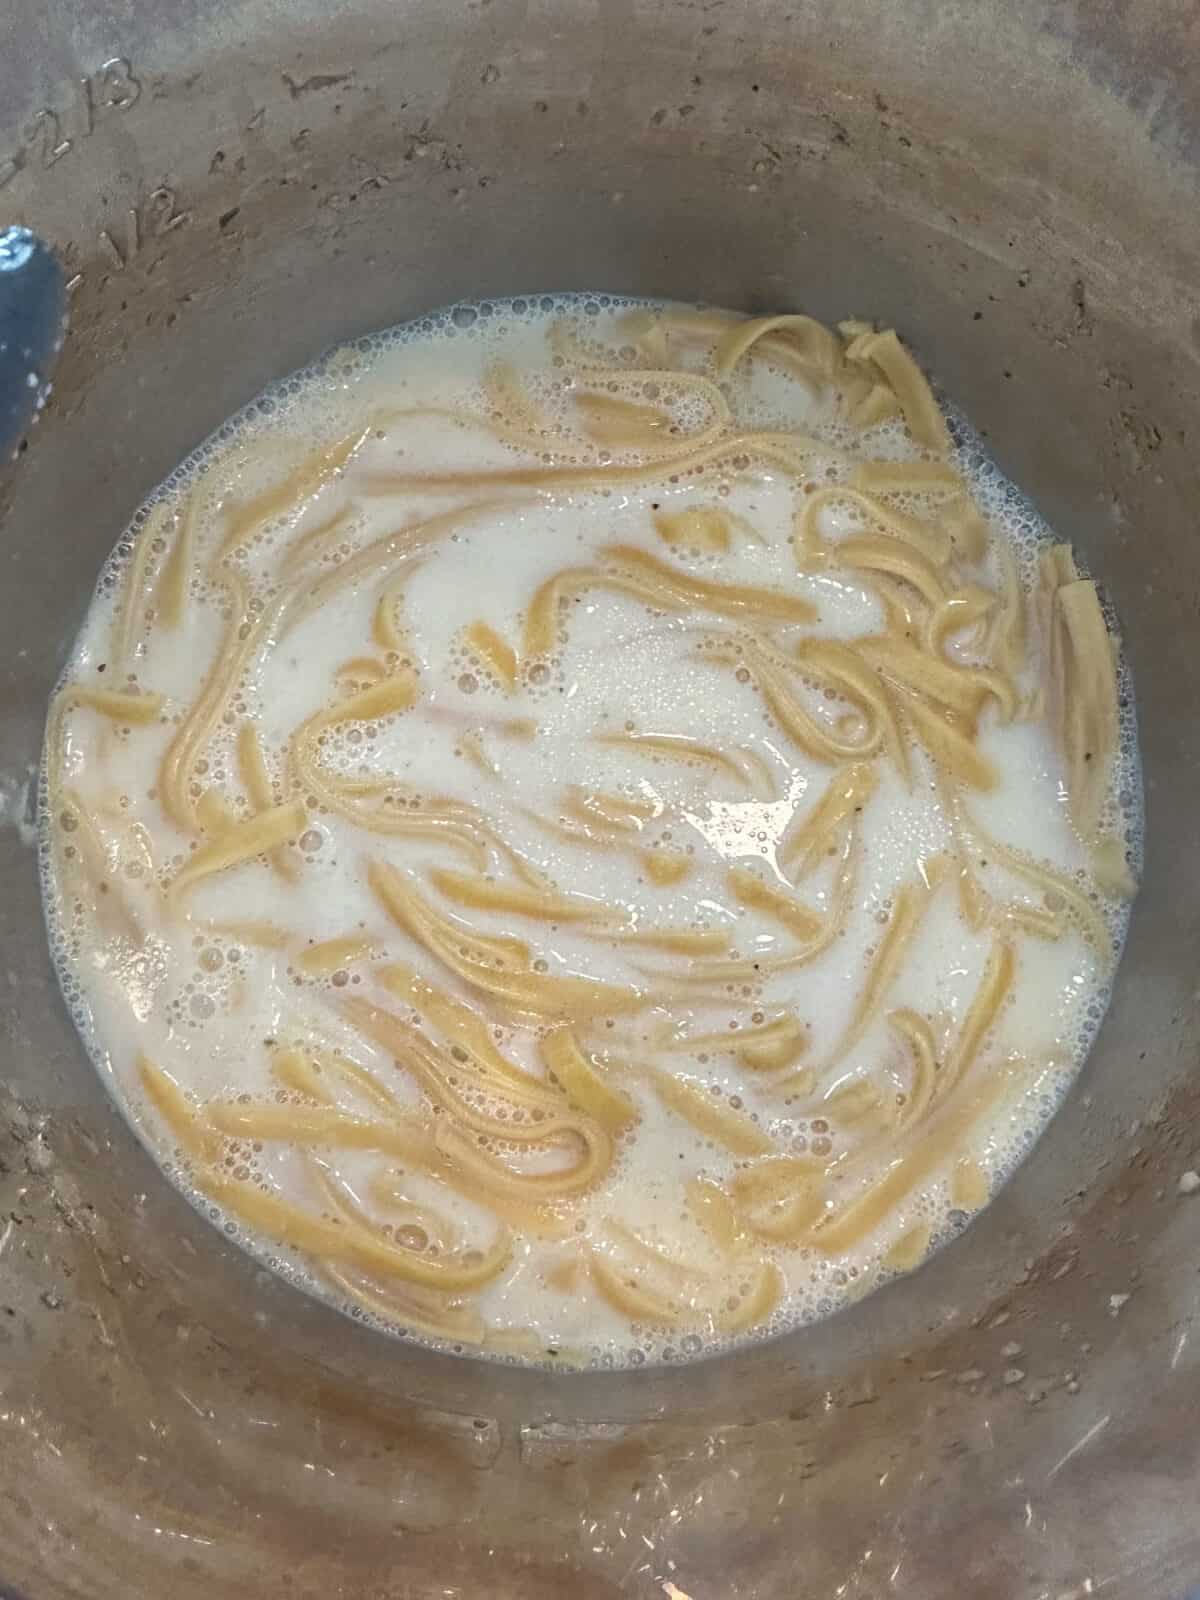 Noodles and a milk mixture in an Instant Pot.